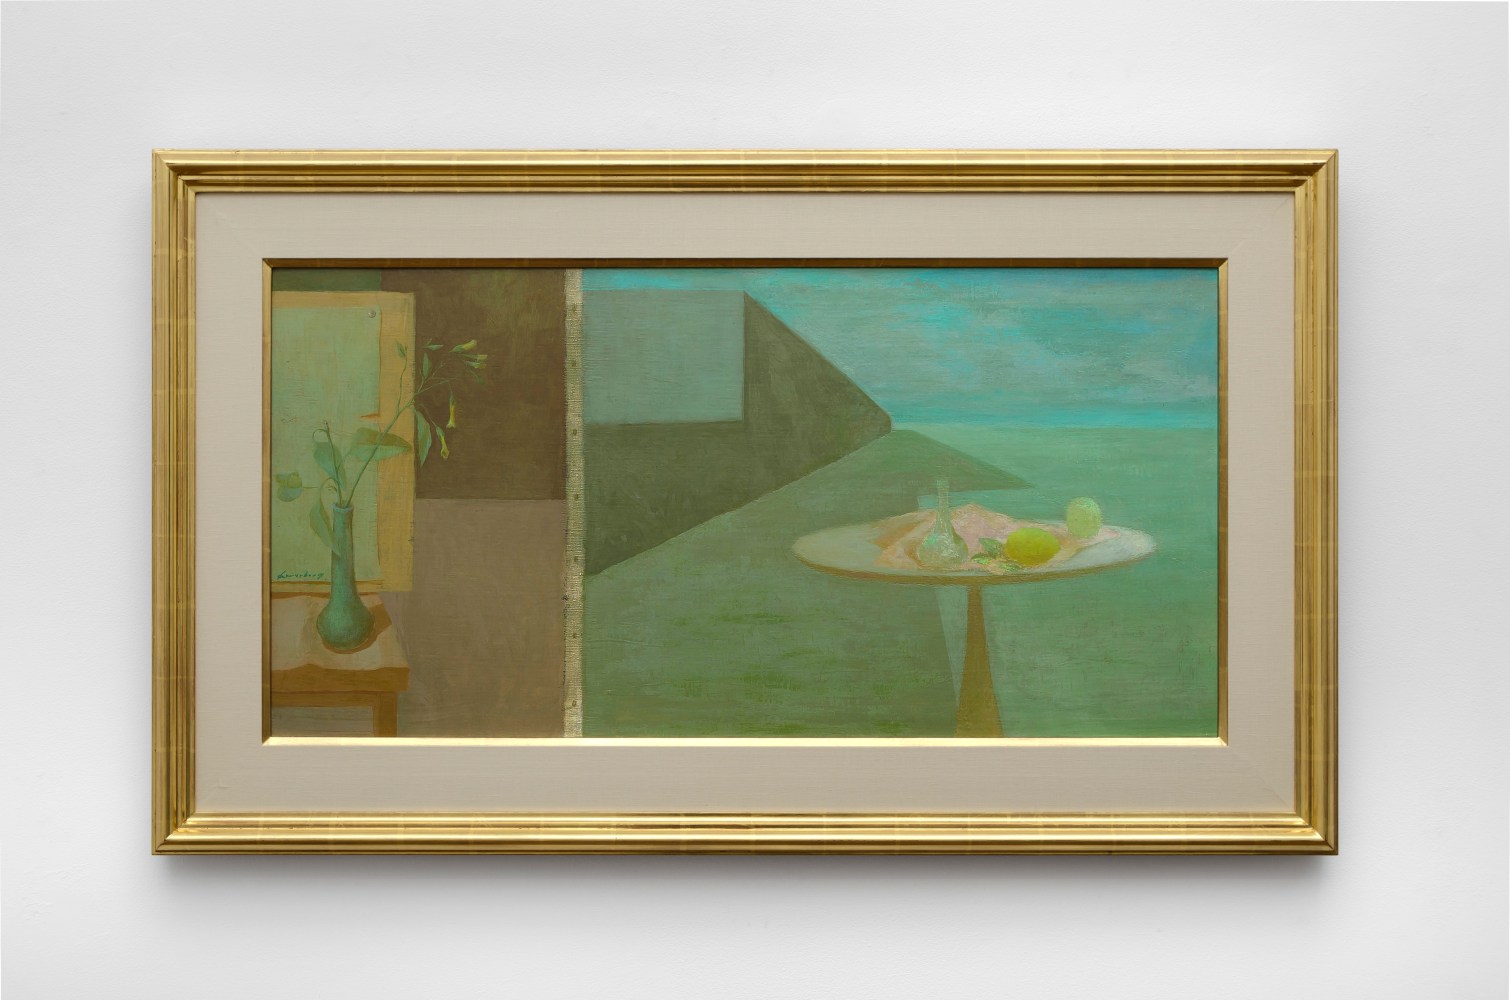 Helen Lundeberg (1908-1999) Enigma of Reality, 1955 oil on canvas 20 x 40 inches; 50.8 x 101.6 centimeters ​LSFA# 01524